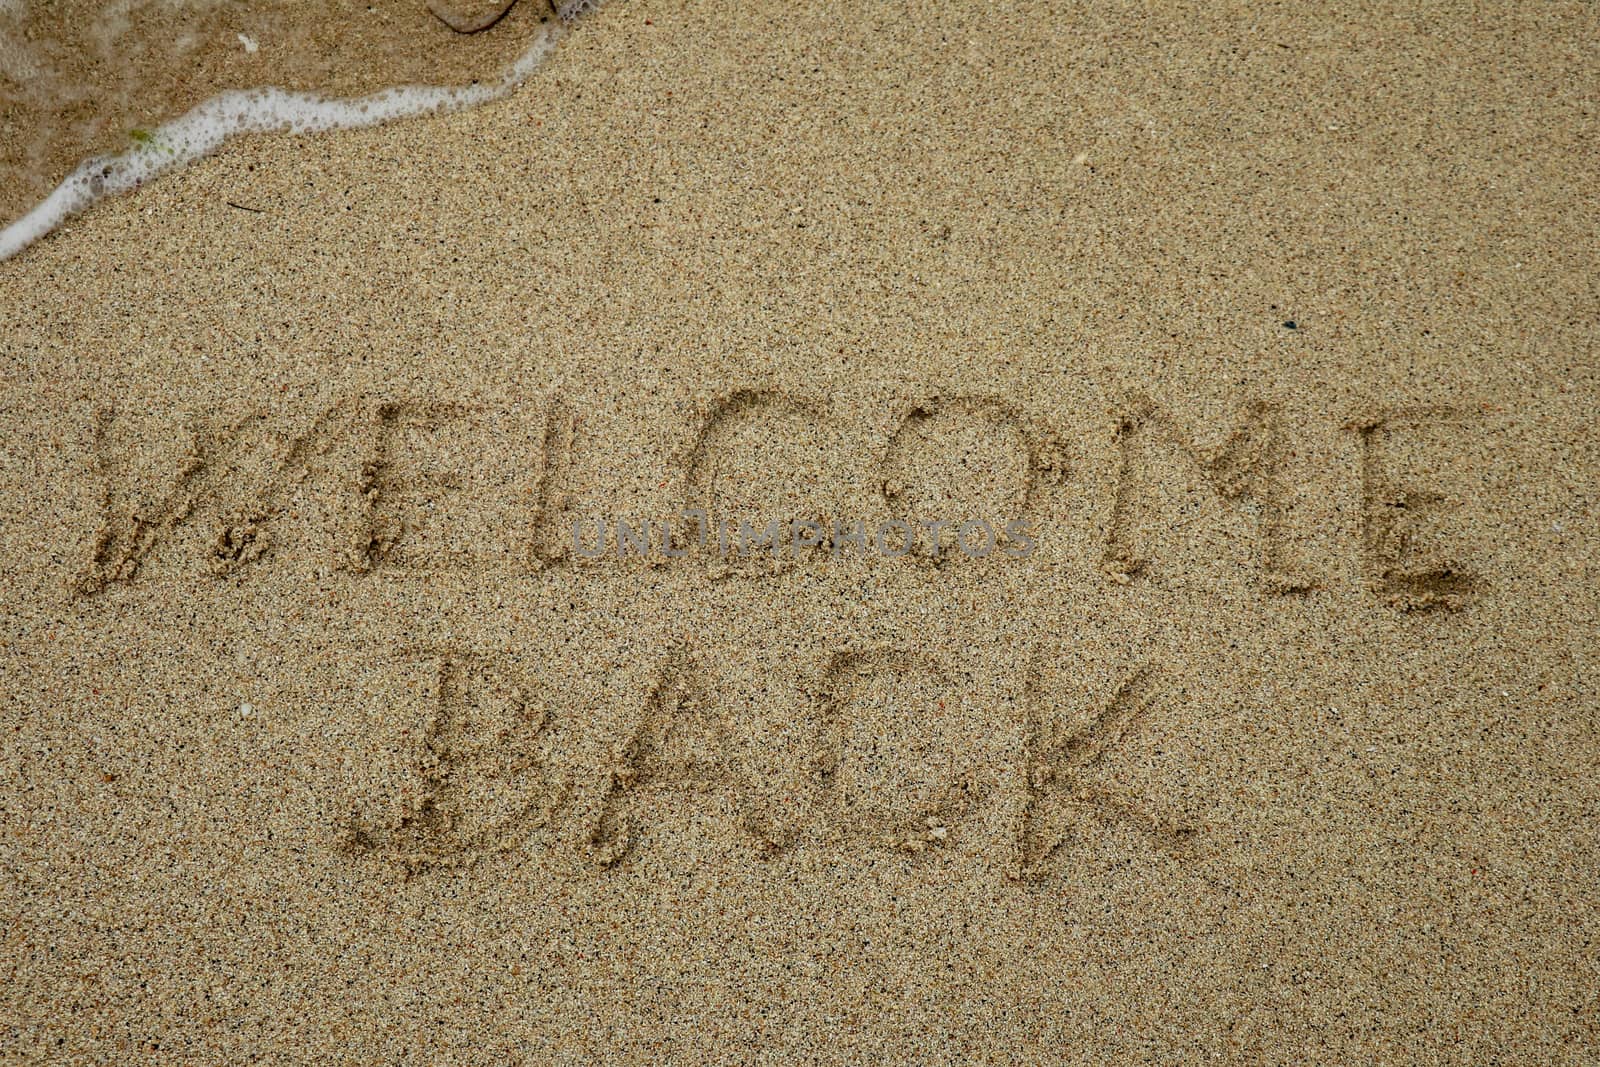 welcome back, text on sand beach, tourism after pandemic concept.